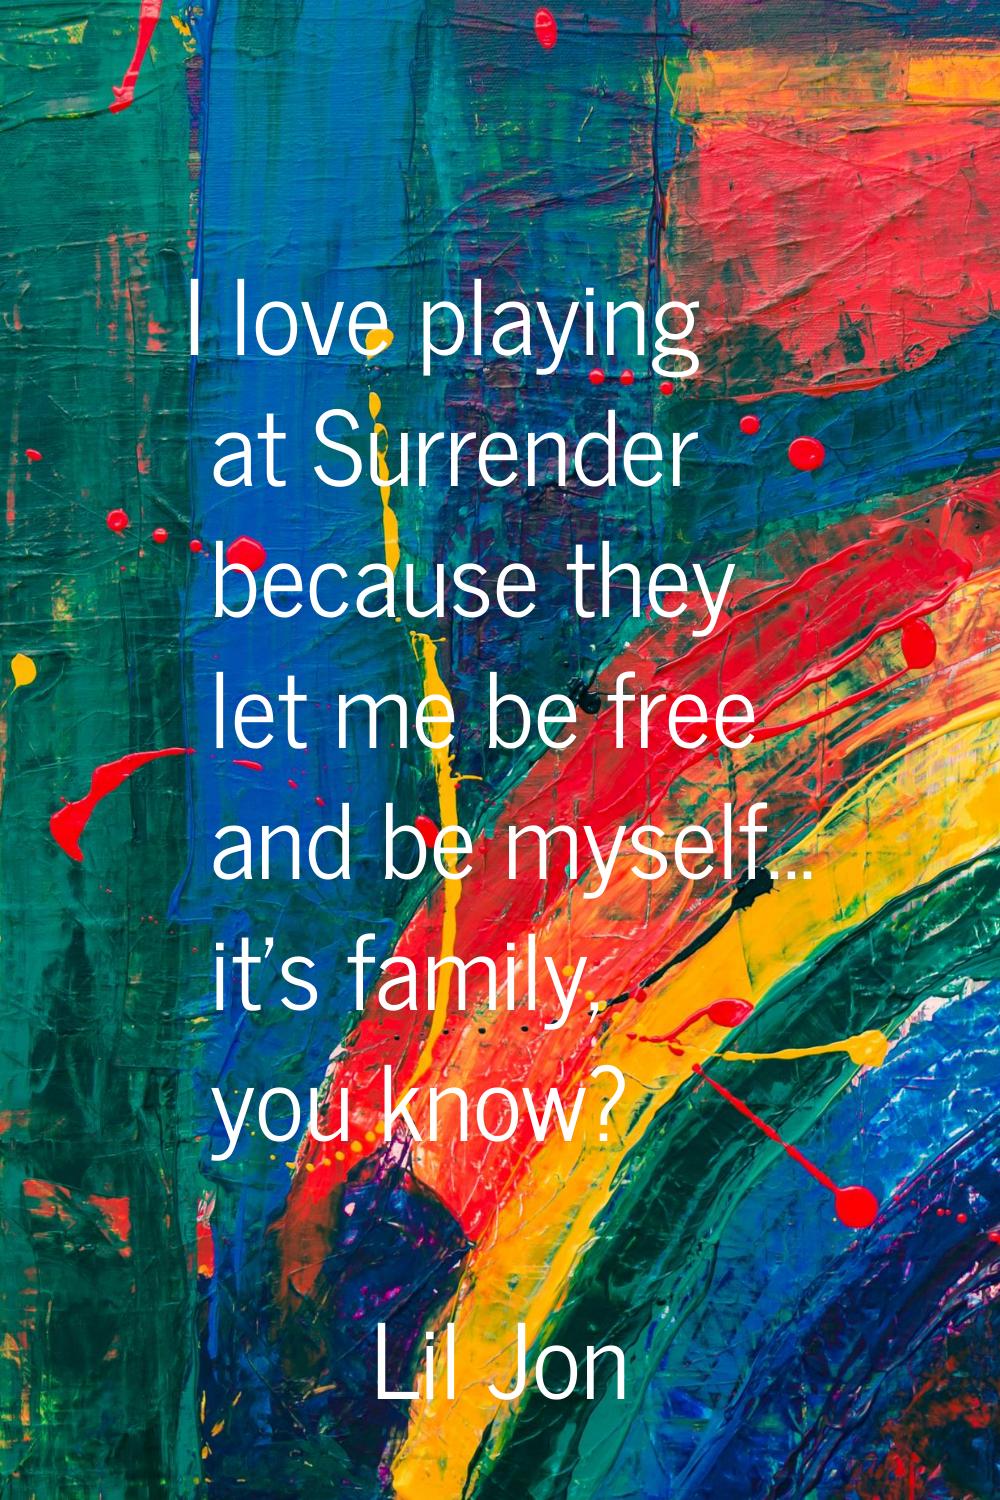 I love playing at Surrender because they let me be free and be myself... it's family, you know?